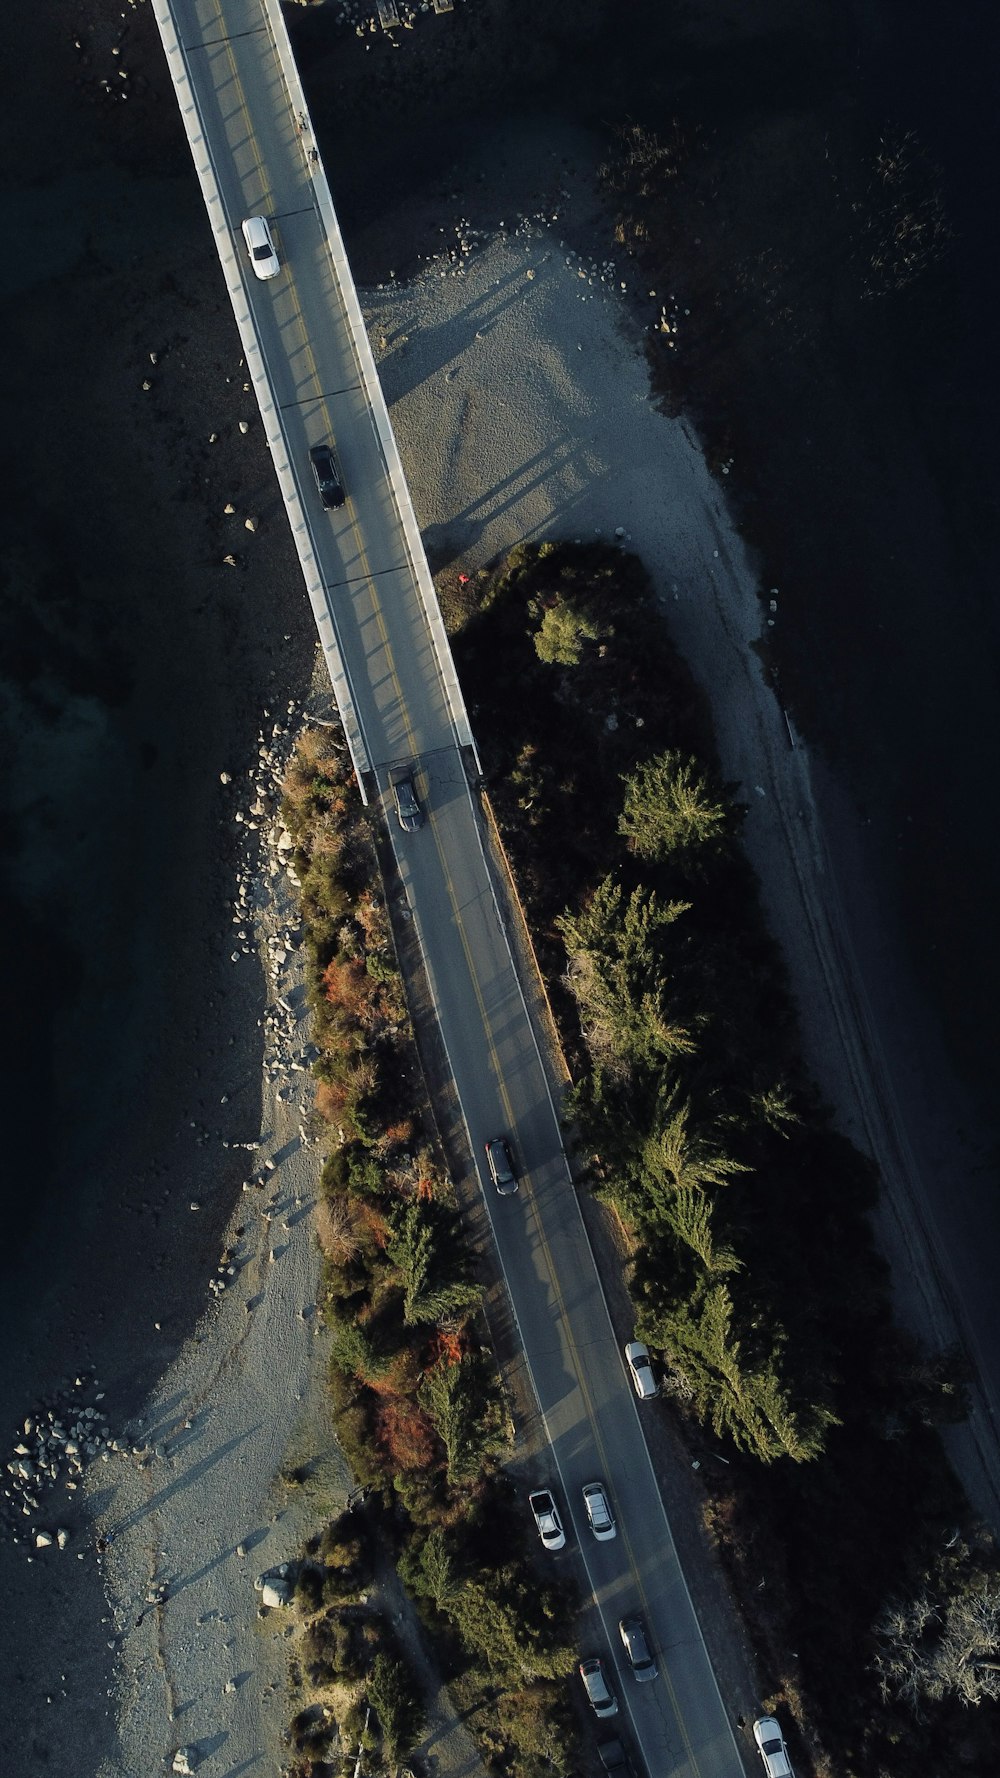 an aerial view of a highway with cars driving on it